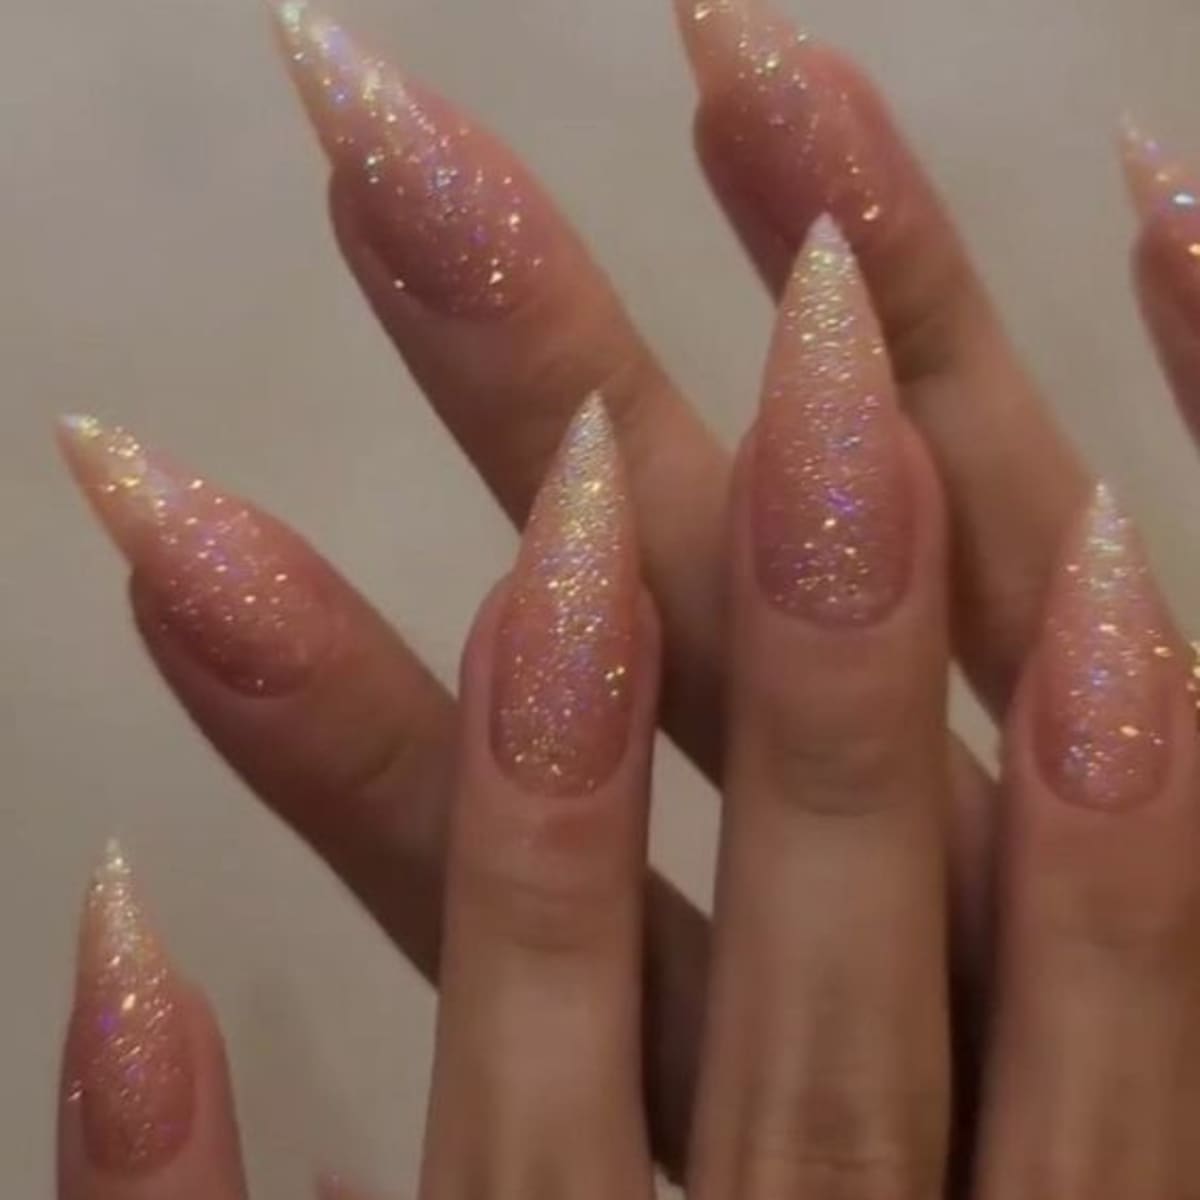 15 Sparkling Nail Ideas That You Have To Try - fashionsy.com